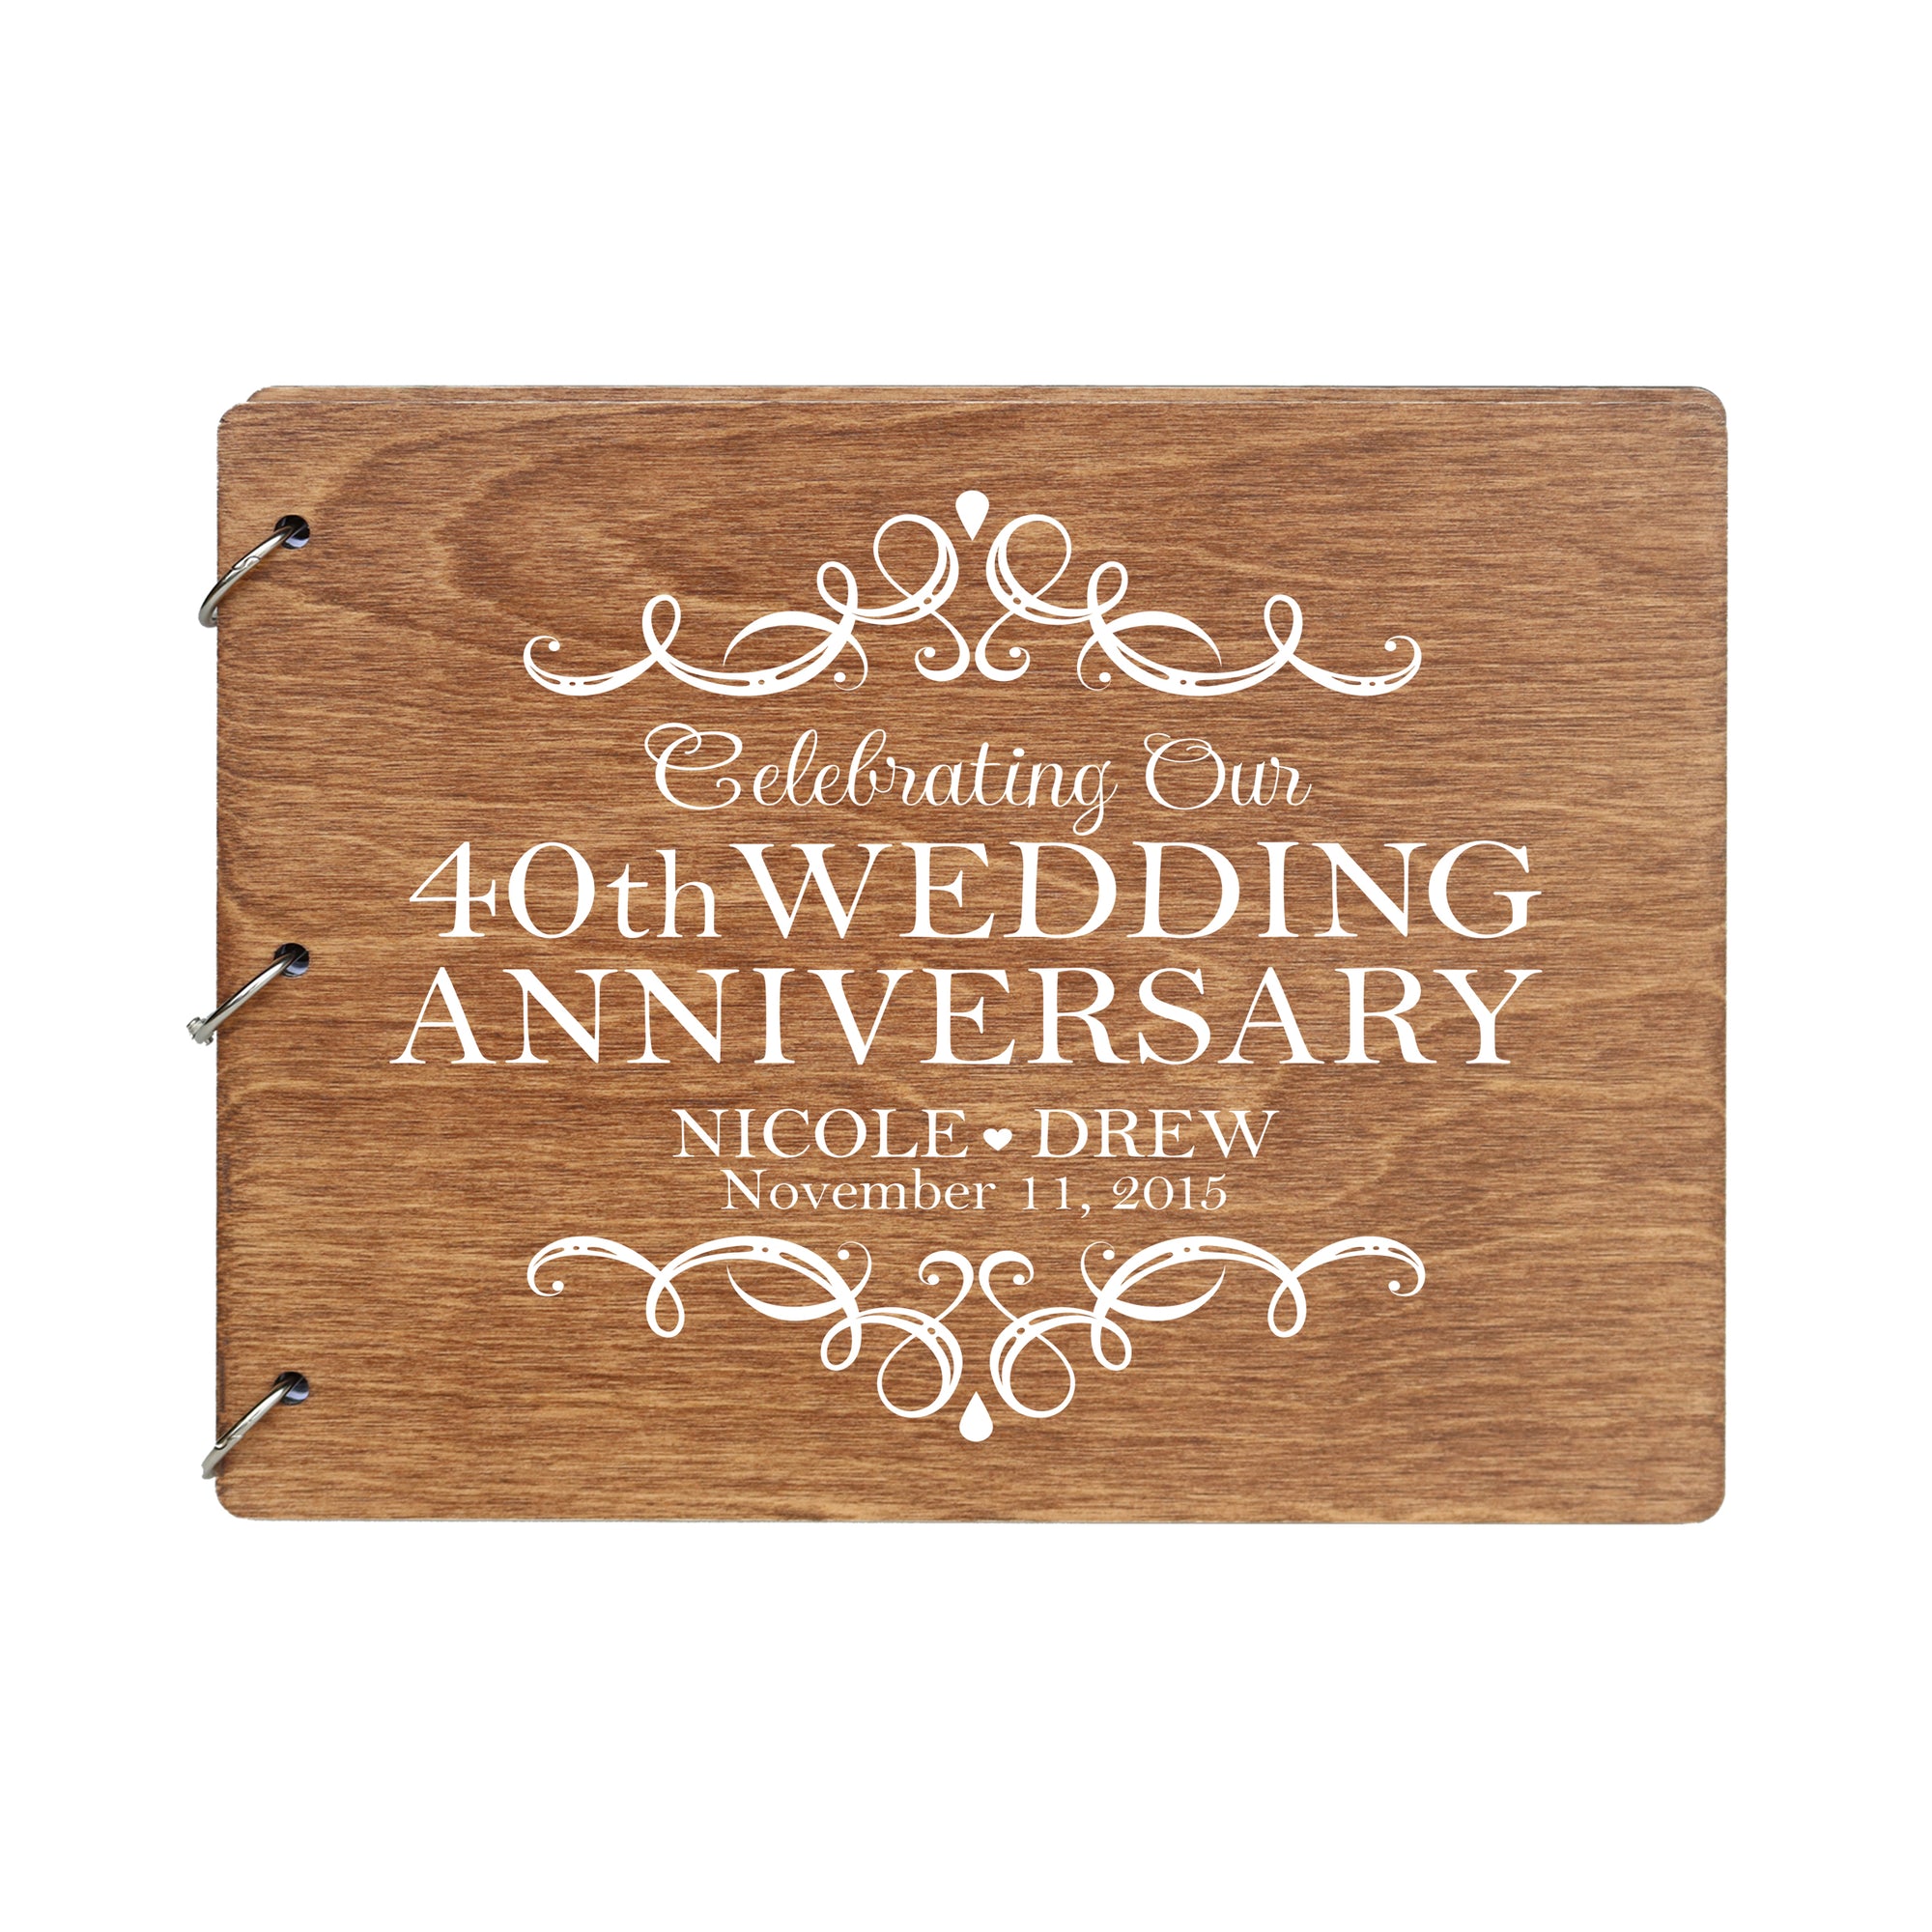 LifeSong Milestones Personalized Guestbook Sign for 40th Wedding Anniversary Gift Ideas